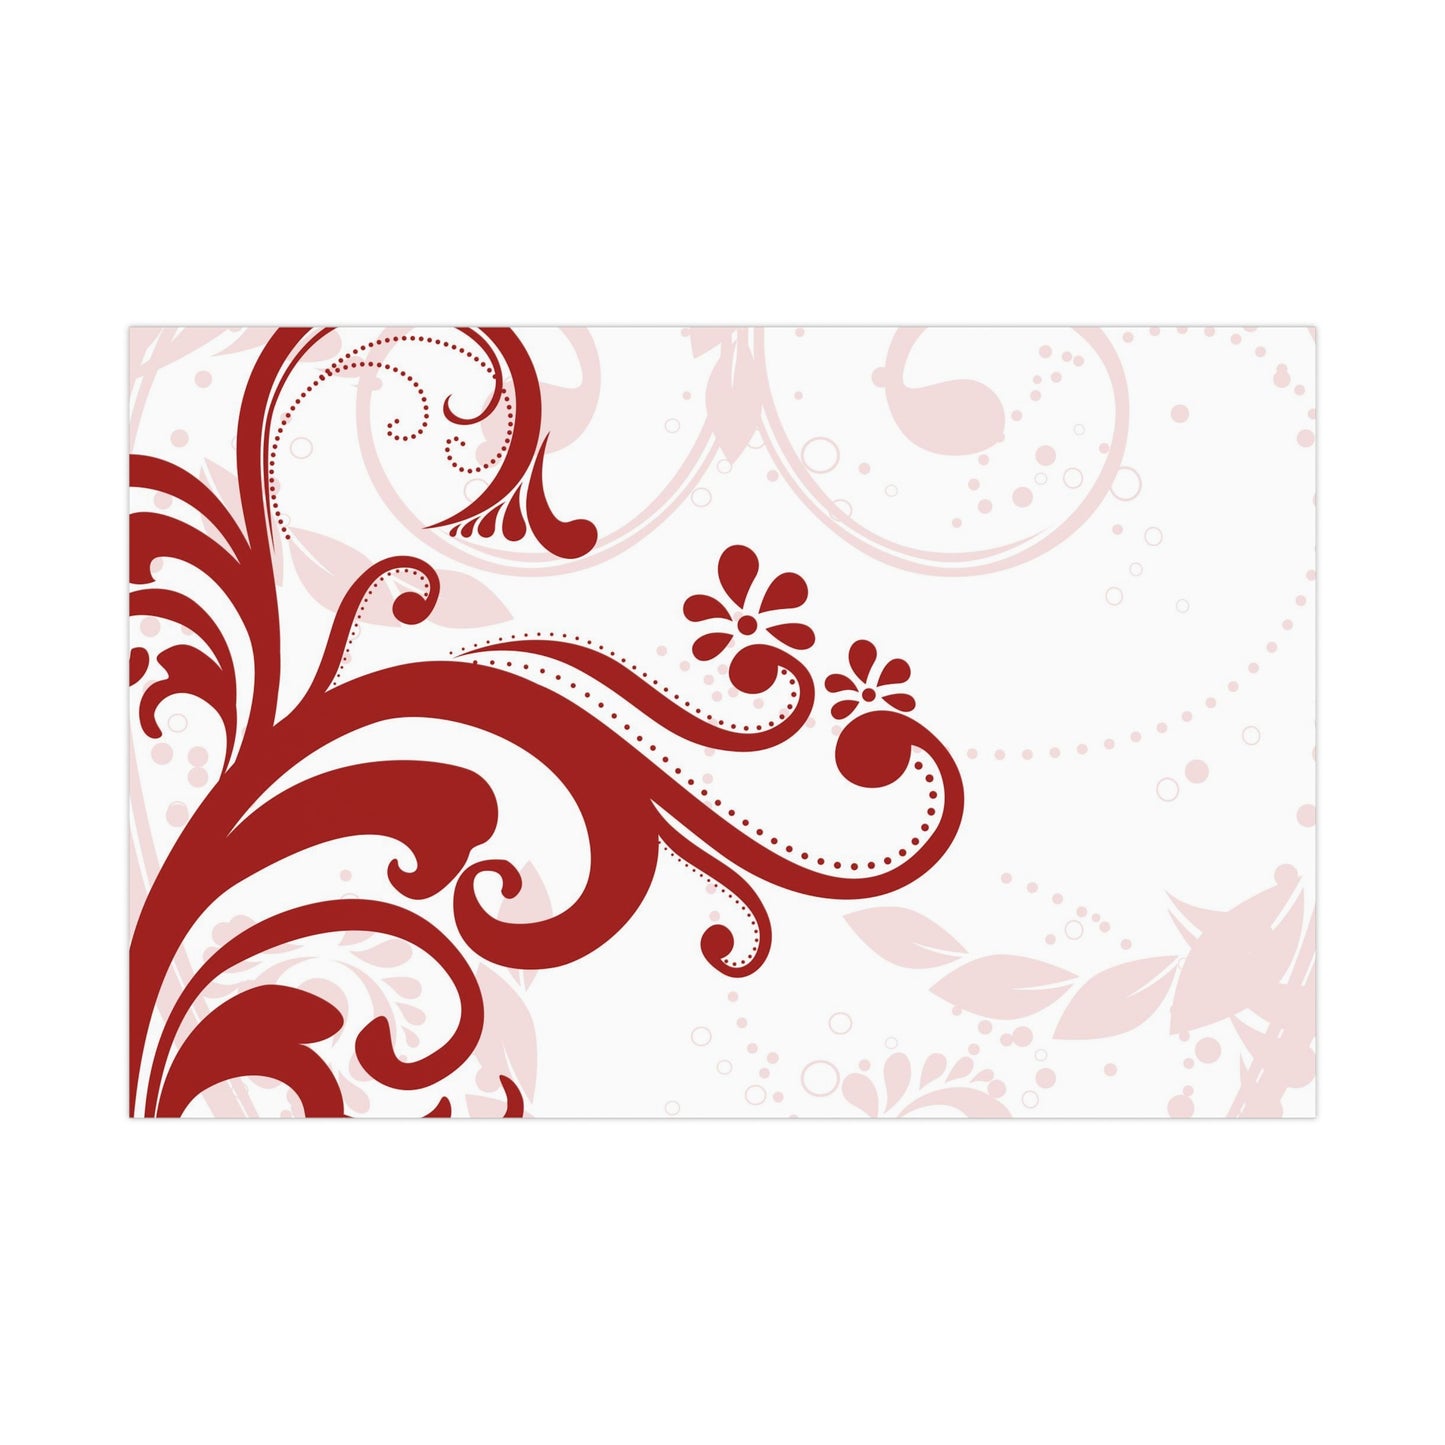 Paisley Swirl Gift Wrap Papers